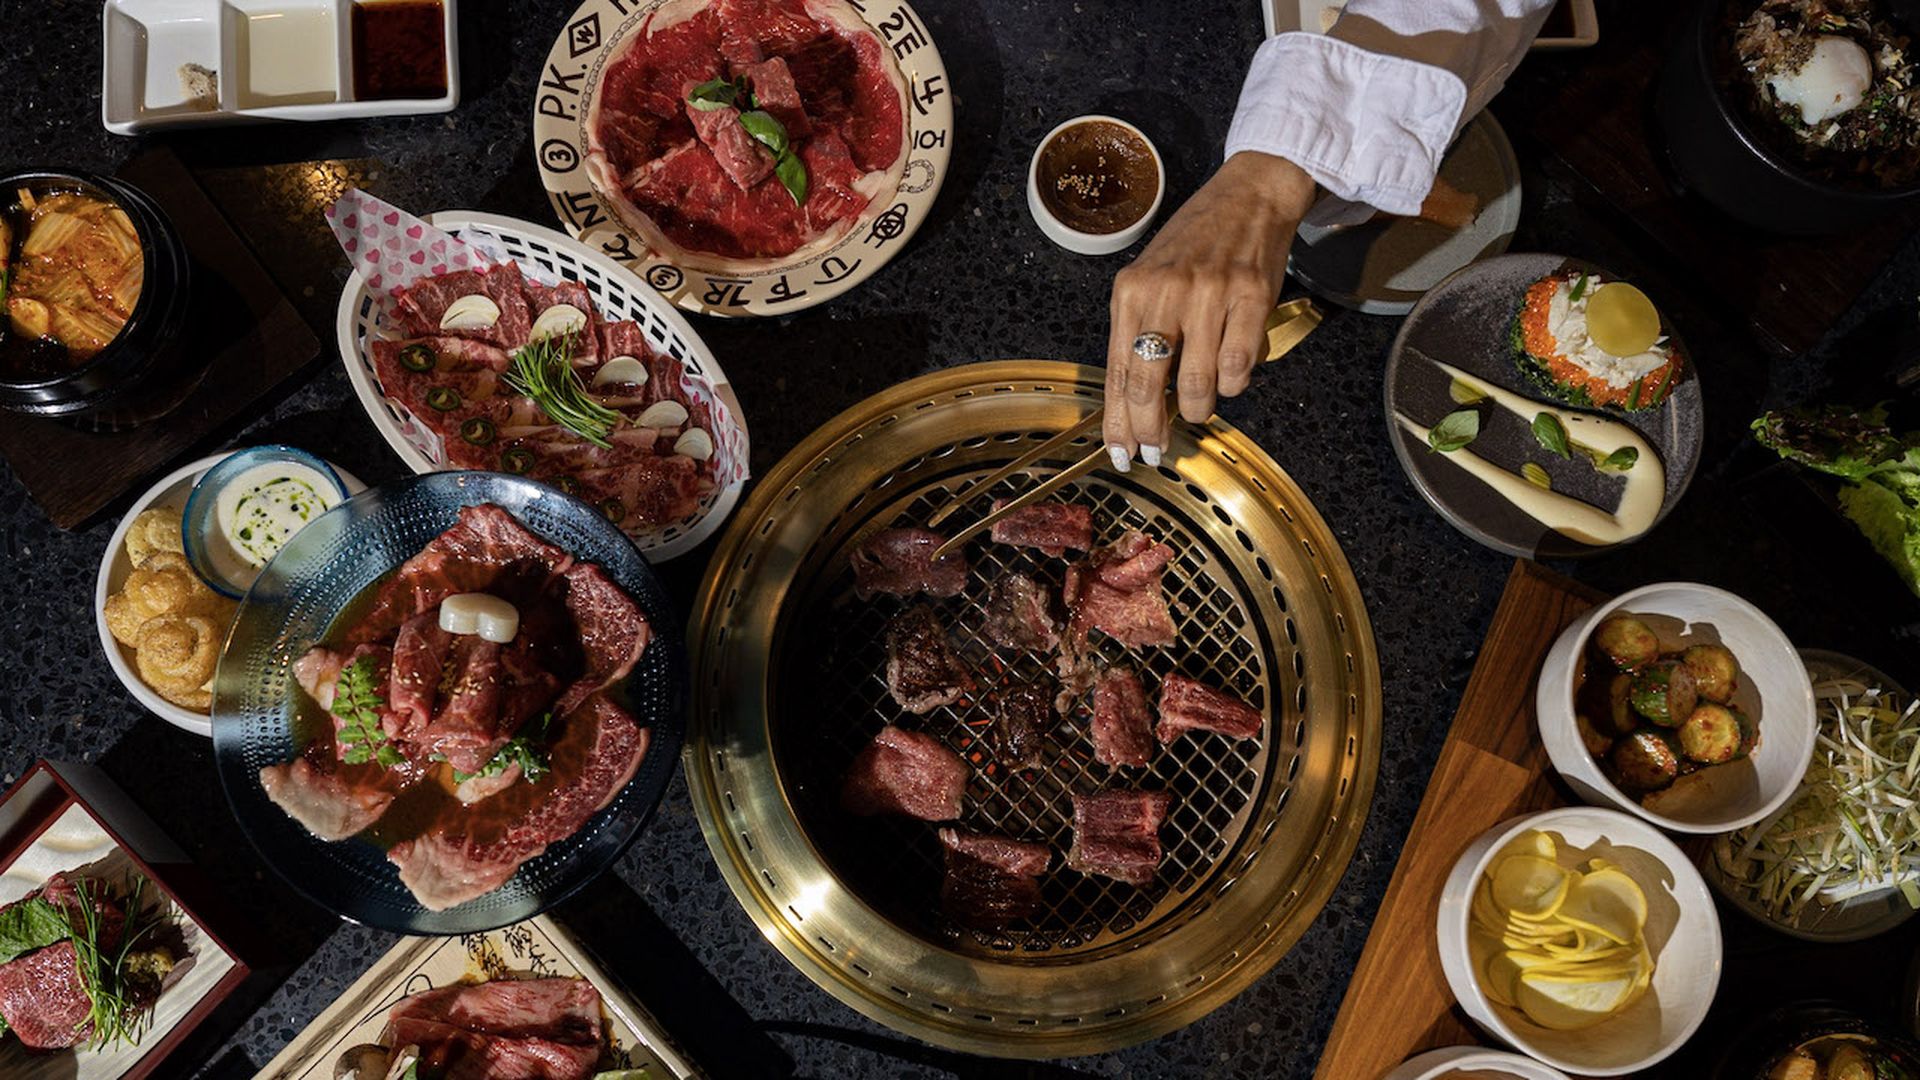 Japanese tabletop barbecue at new D.C. food hall: Love, Makoto. Photograph by Mike Fuentes Photography